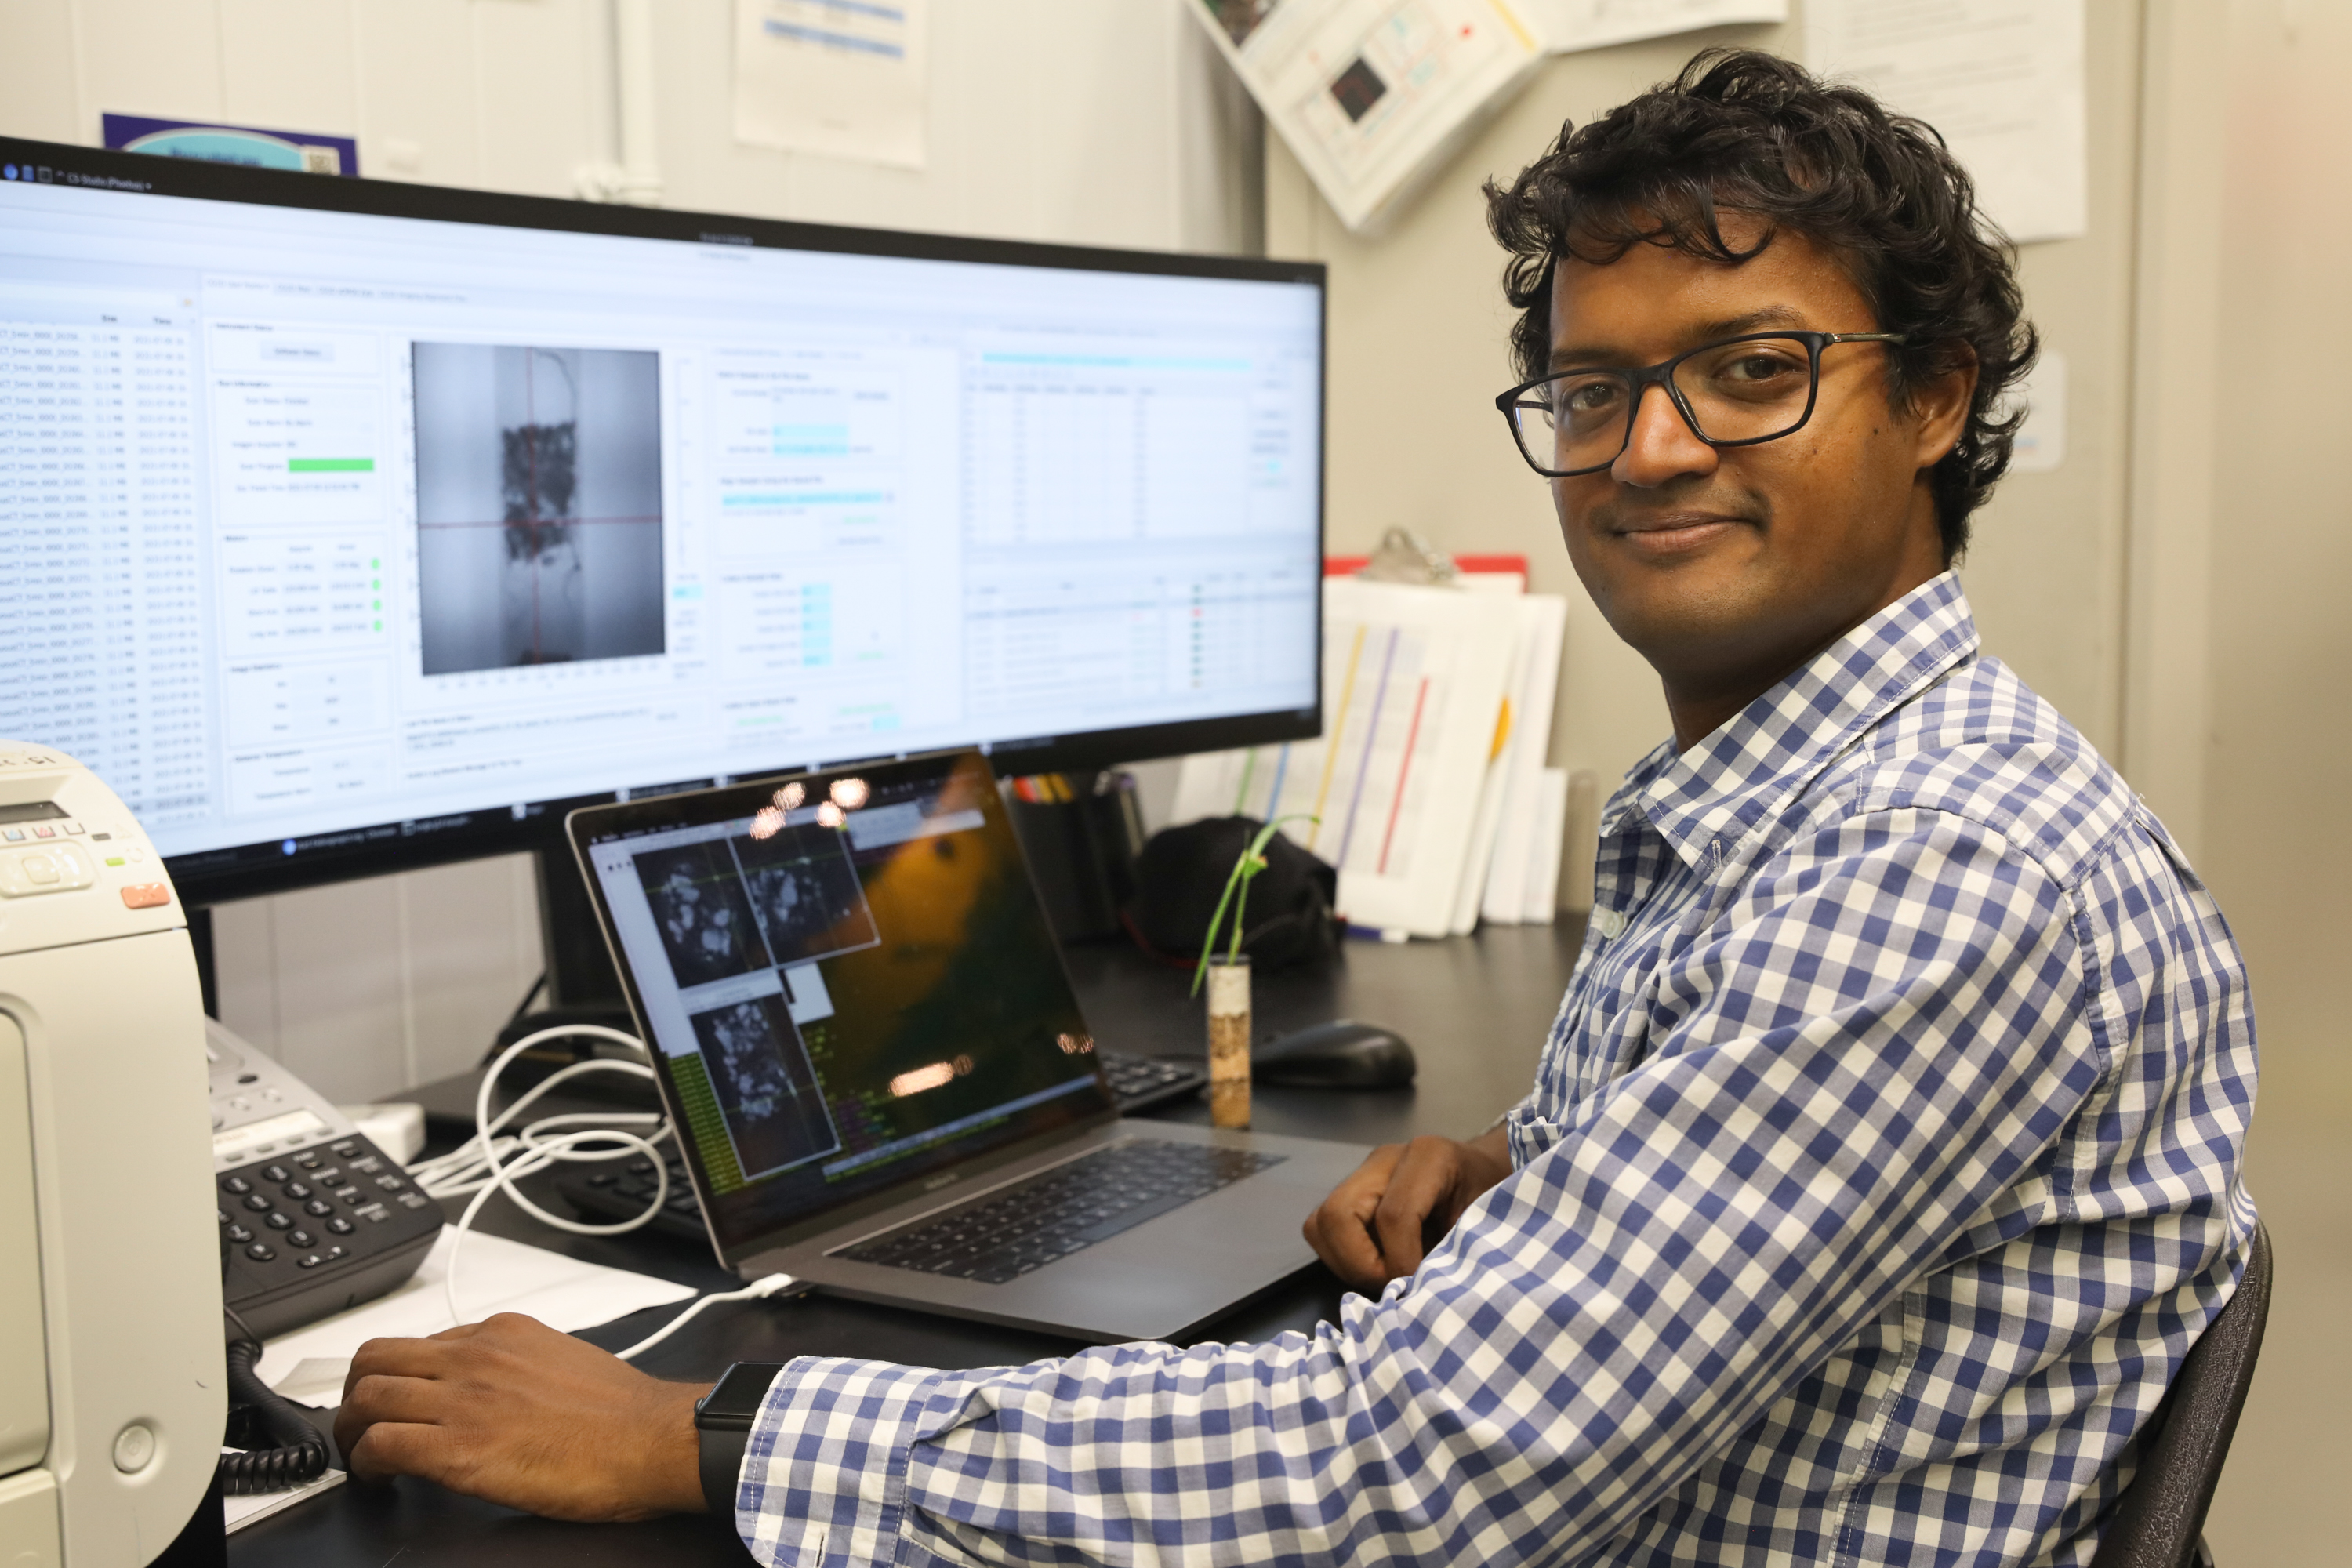 Singanallur “Venkat” Venkatakrishnan helped develop an algorithm to obtain real-time, fast CT images of intricate plant root systems and their functions. Credit: ORNL/Genevieve Martin